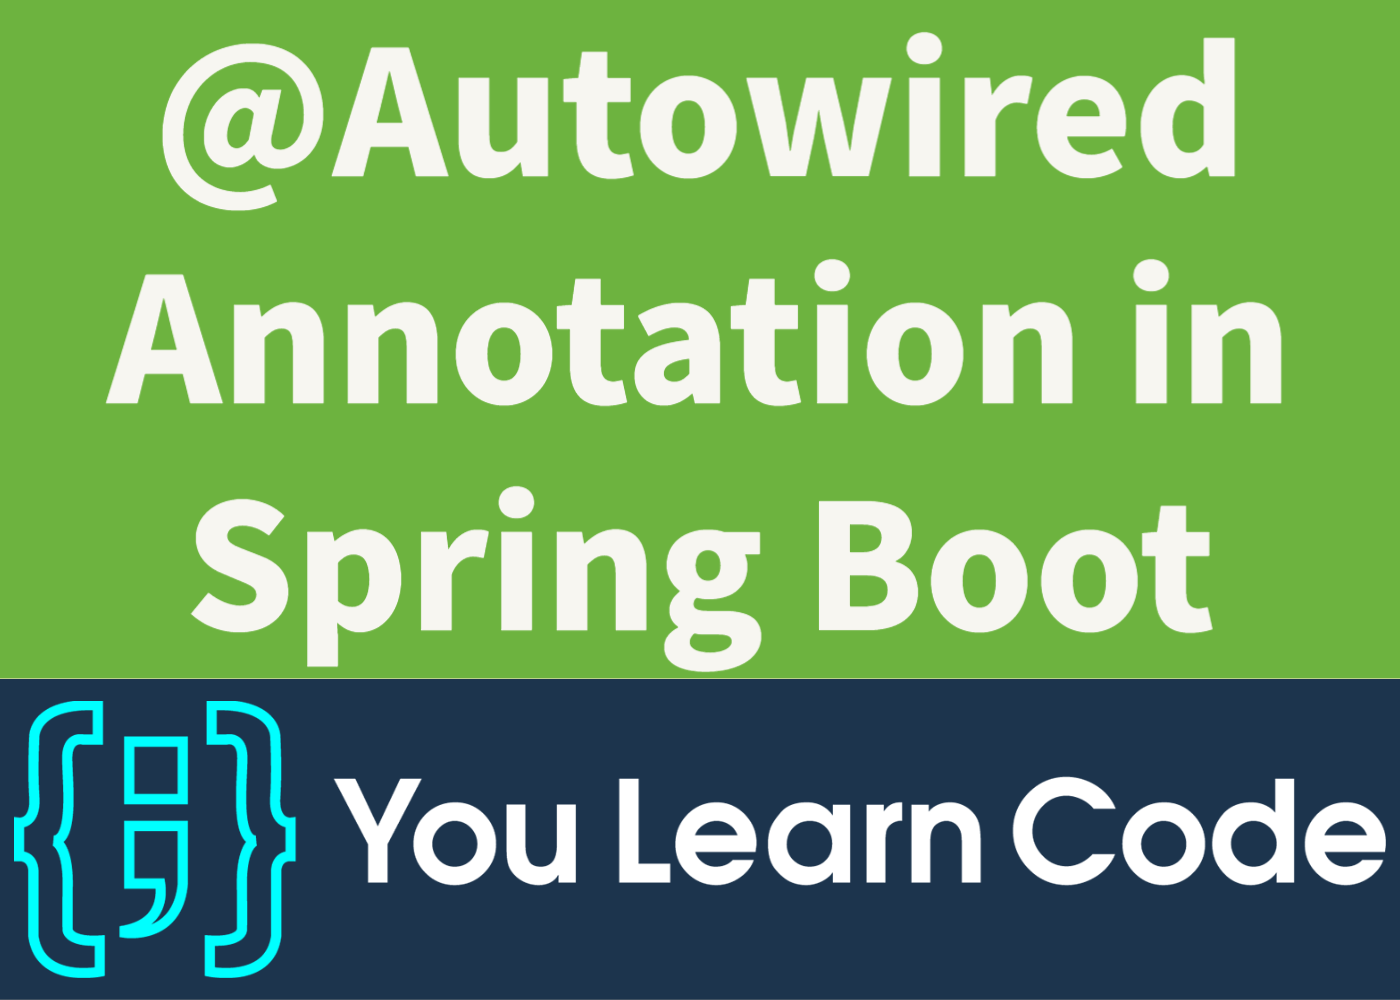 mapping annotations in spring boot